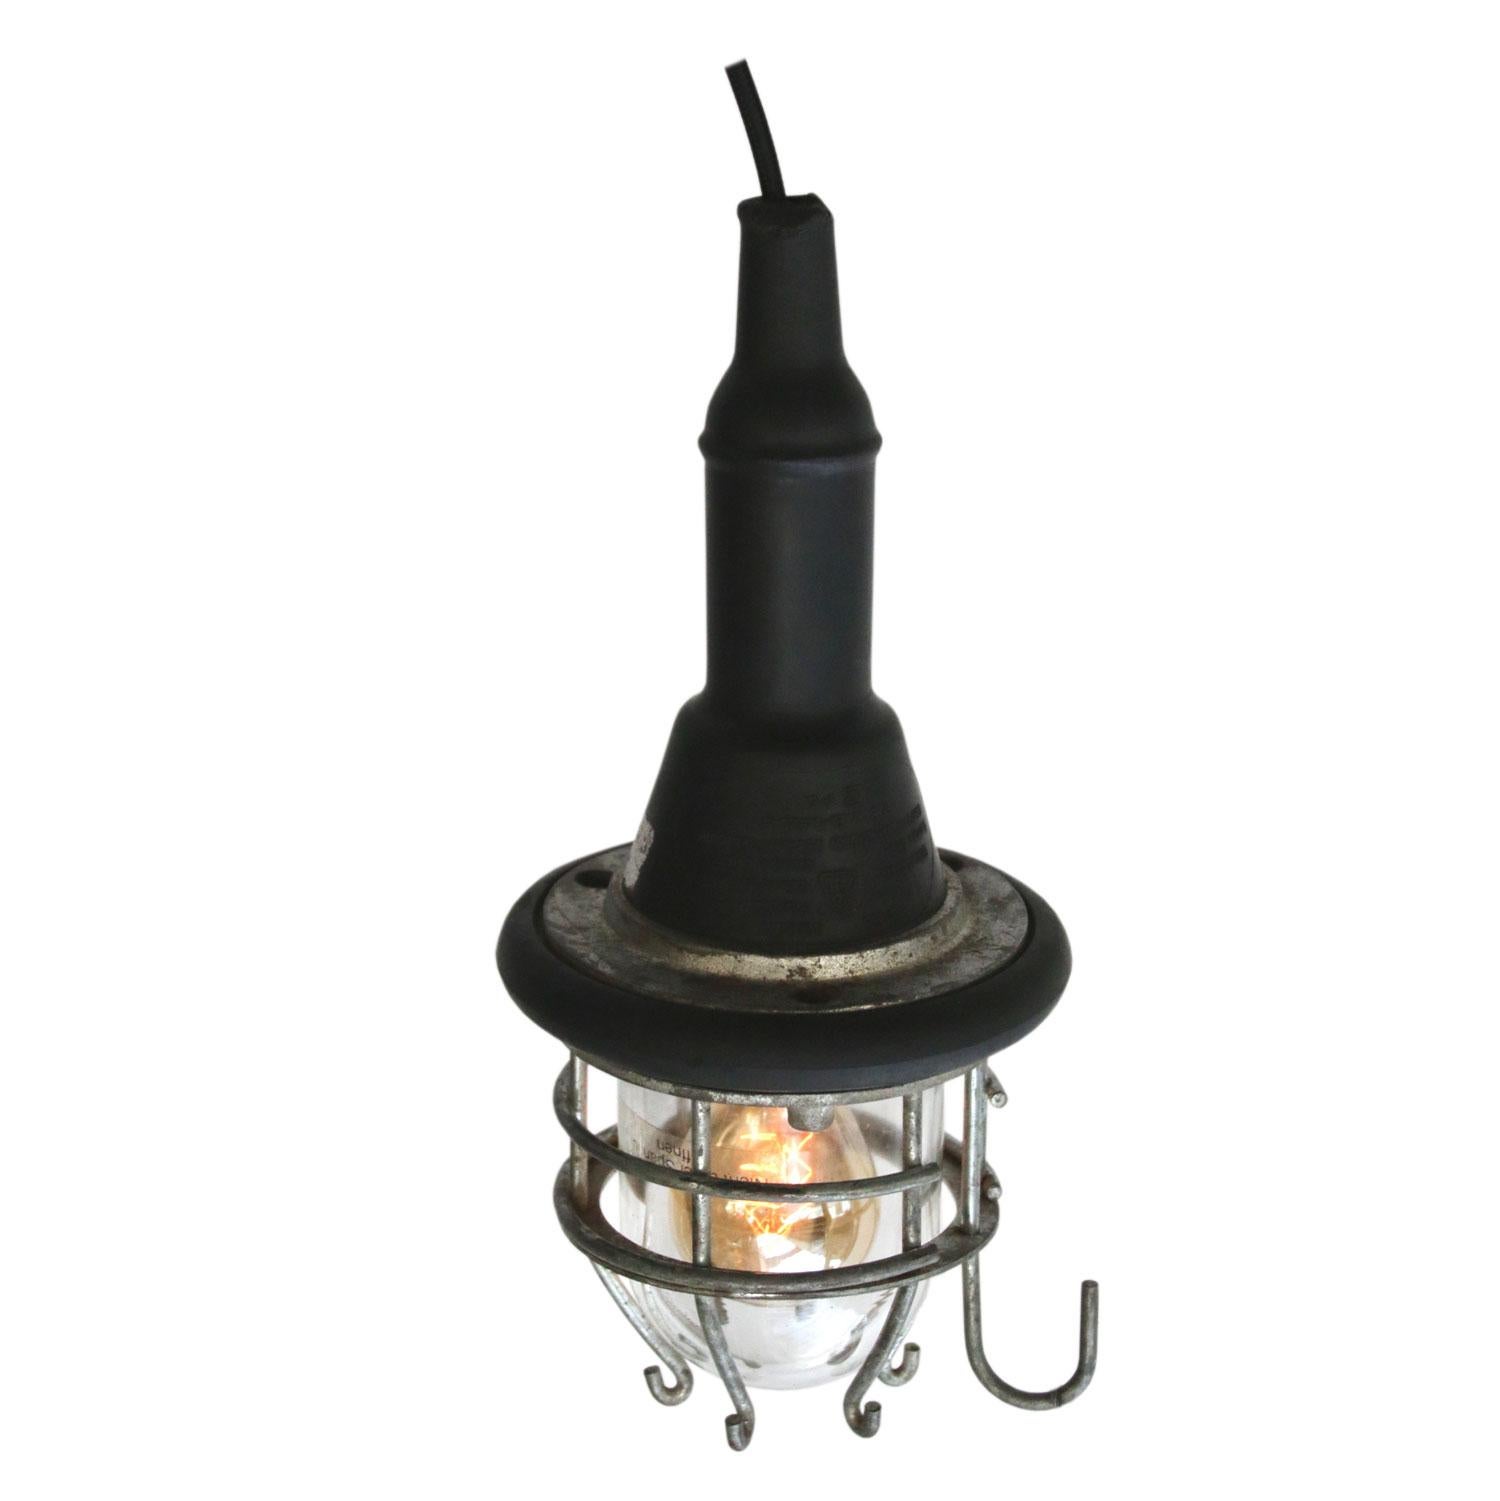 Work light. 2 meter black cotton wire. Clear glass. Metal cage.

Weight: 2.3 kg / 5.1 lb

All lamps have been made suitable by international standards for incandescent light bulbs, energy-efficient and LED bulbs. E26/E27 bulb holders and new